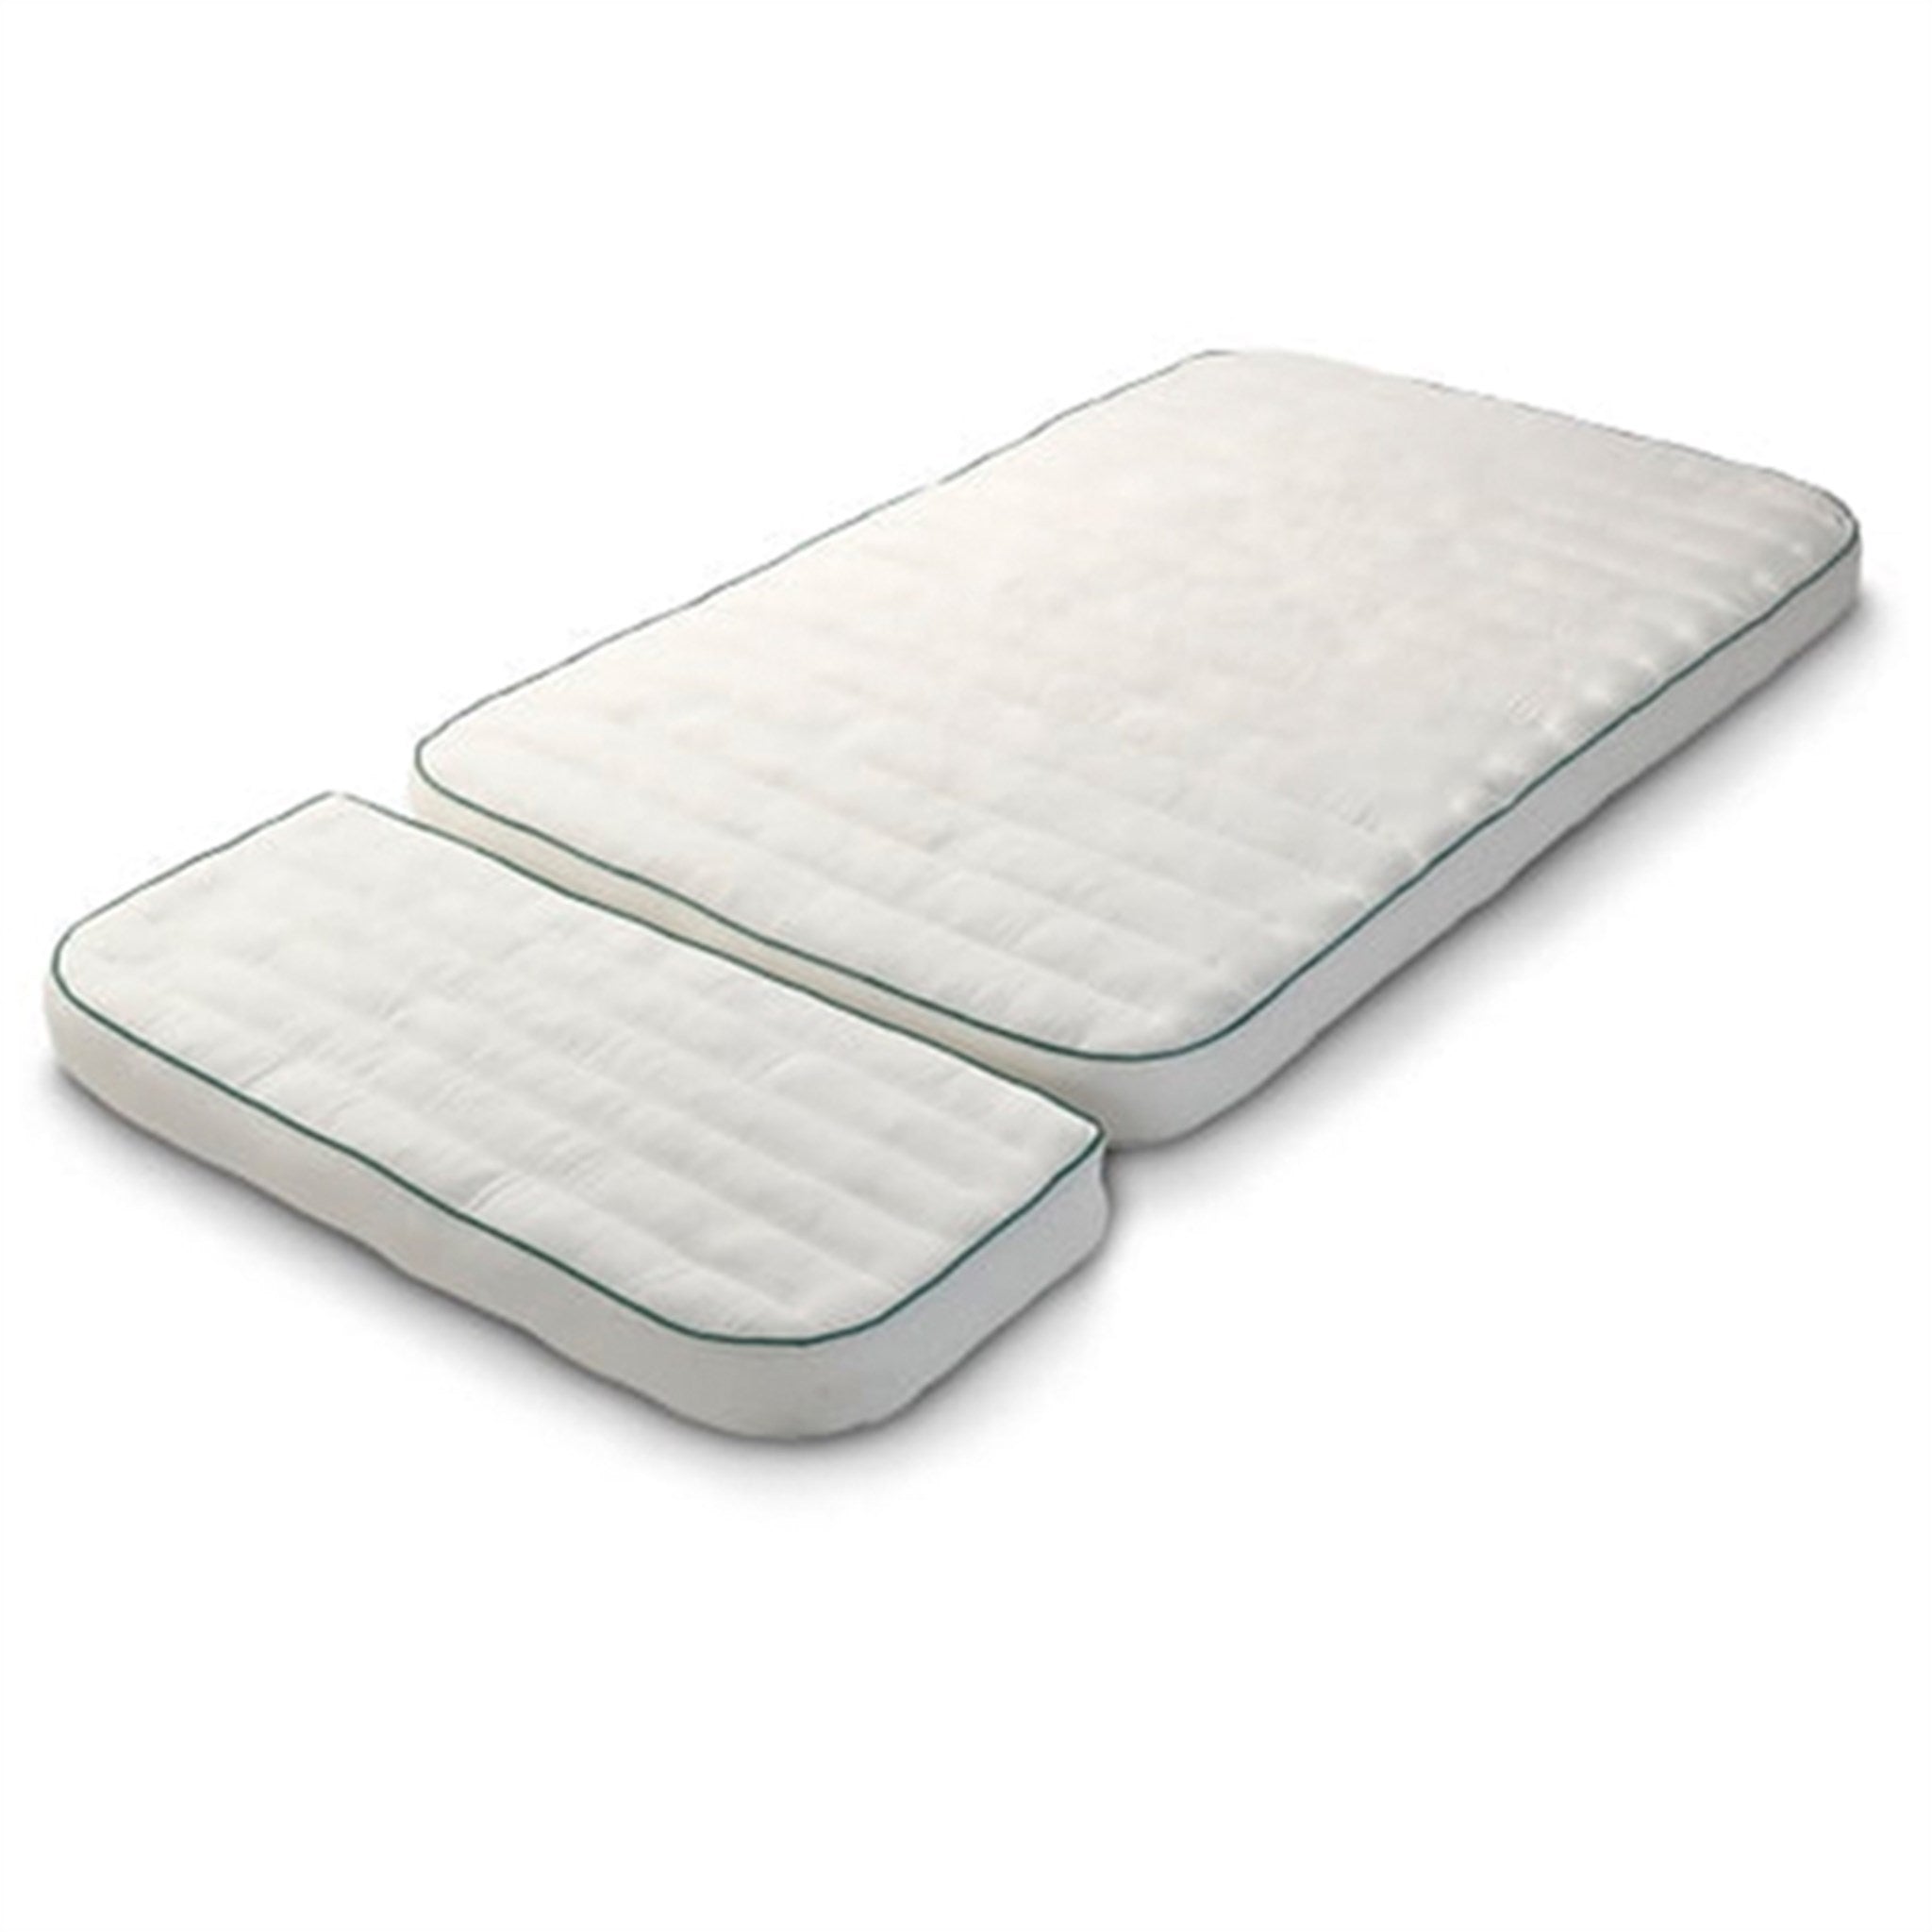 Cocoon Organic Kapok Mattress Extention for Juno Bed